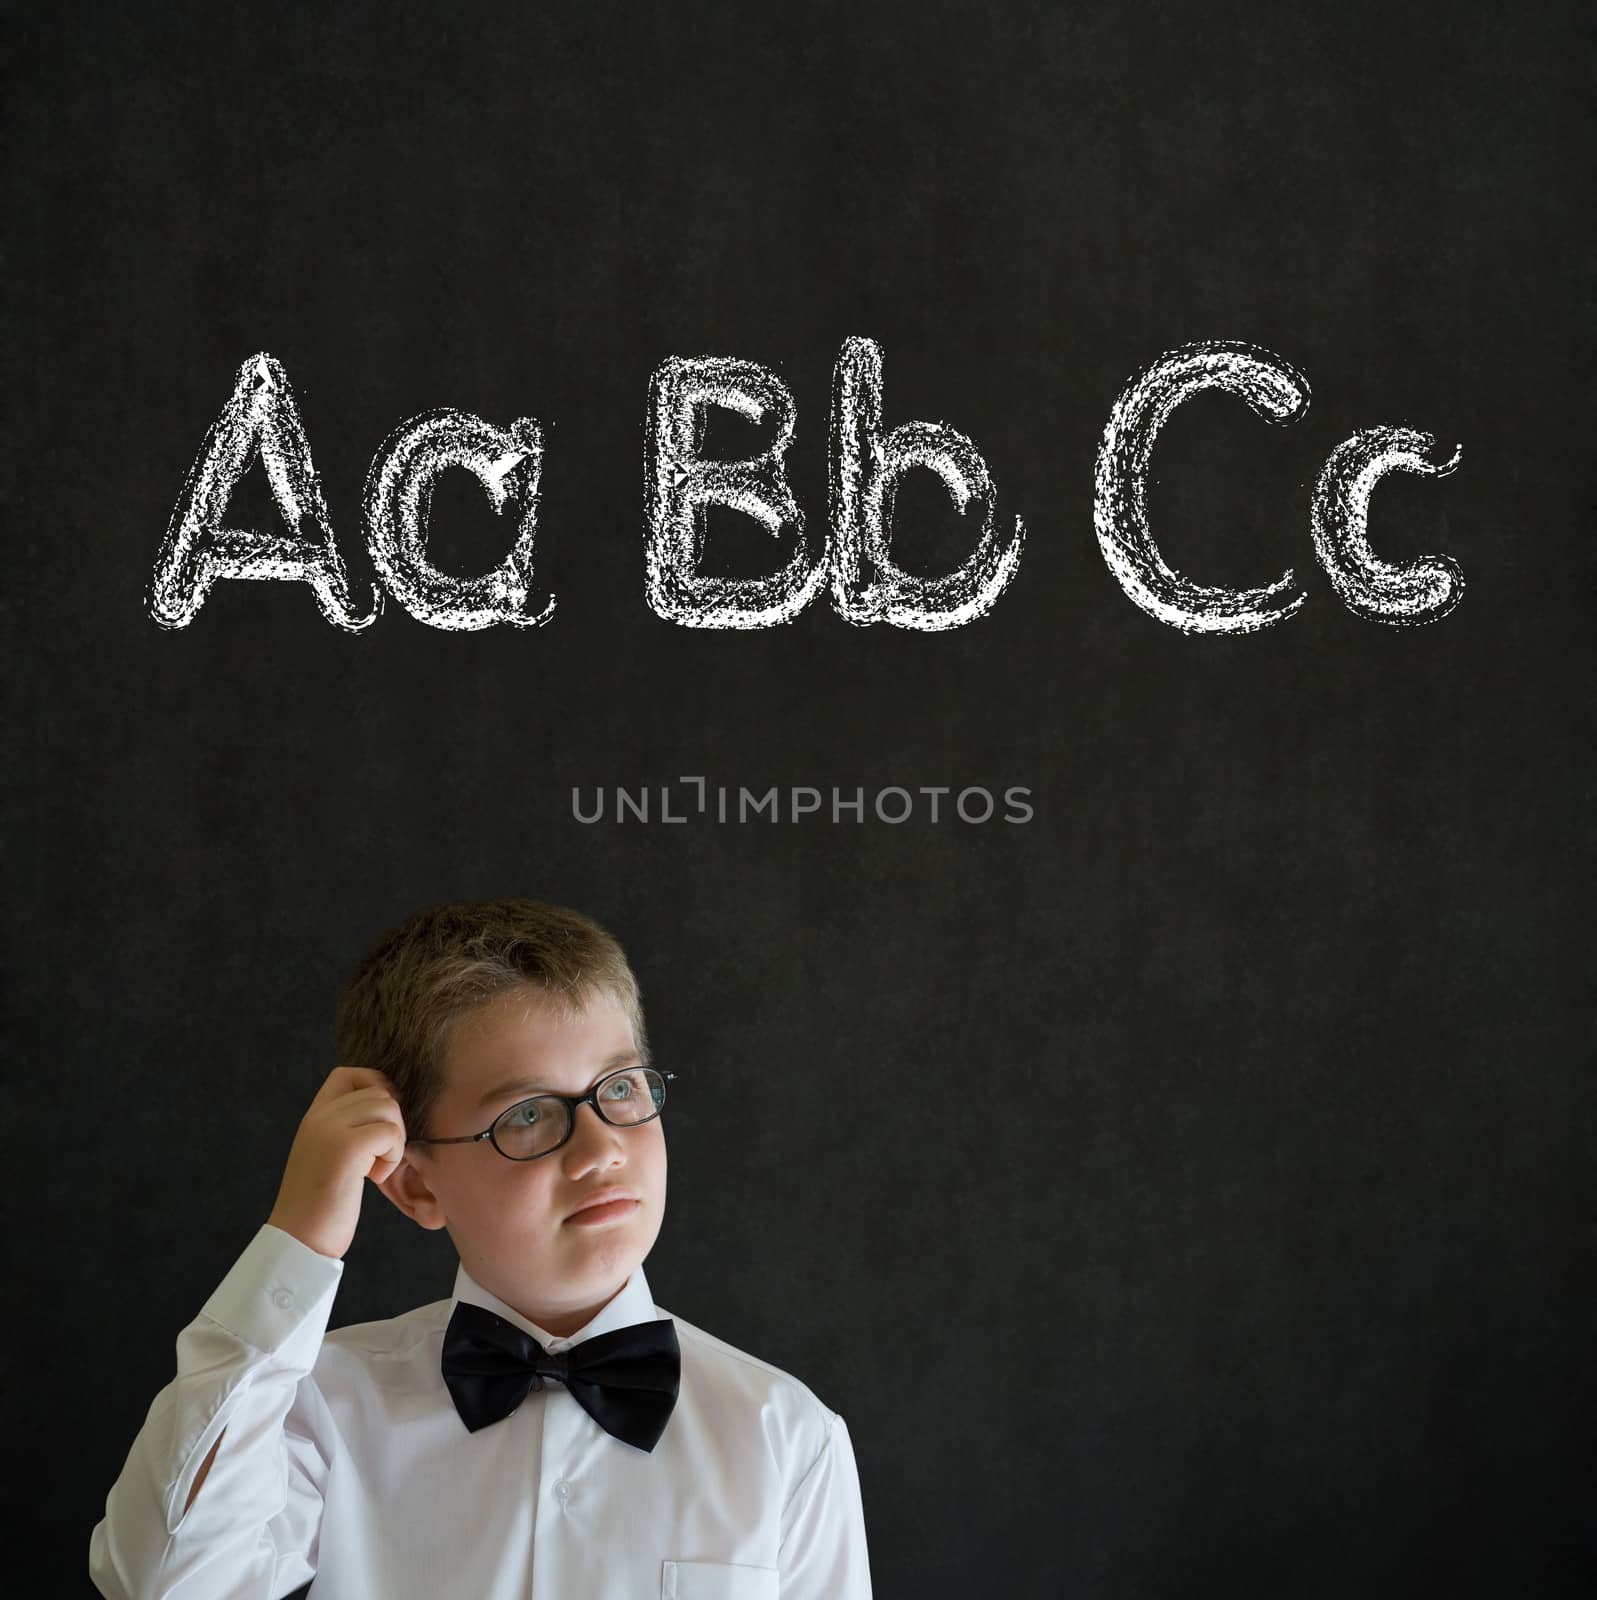 Scratching head thinking boy dressed up as business man with learn English language alphabet on blackboard background